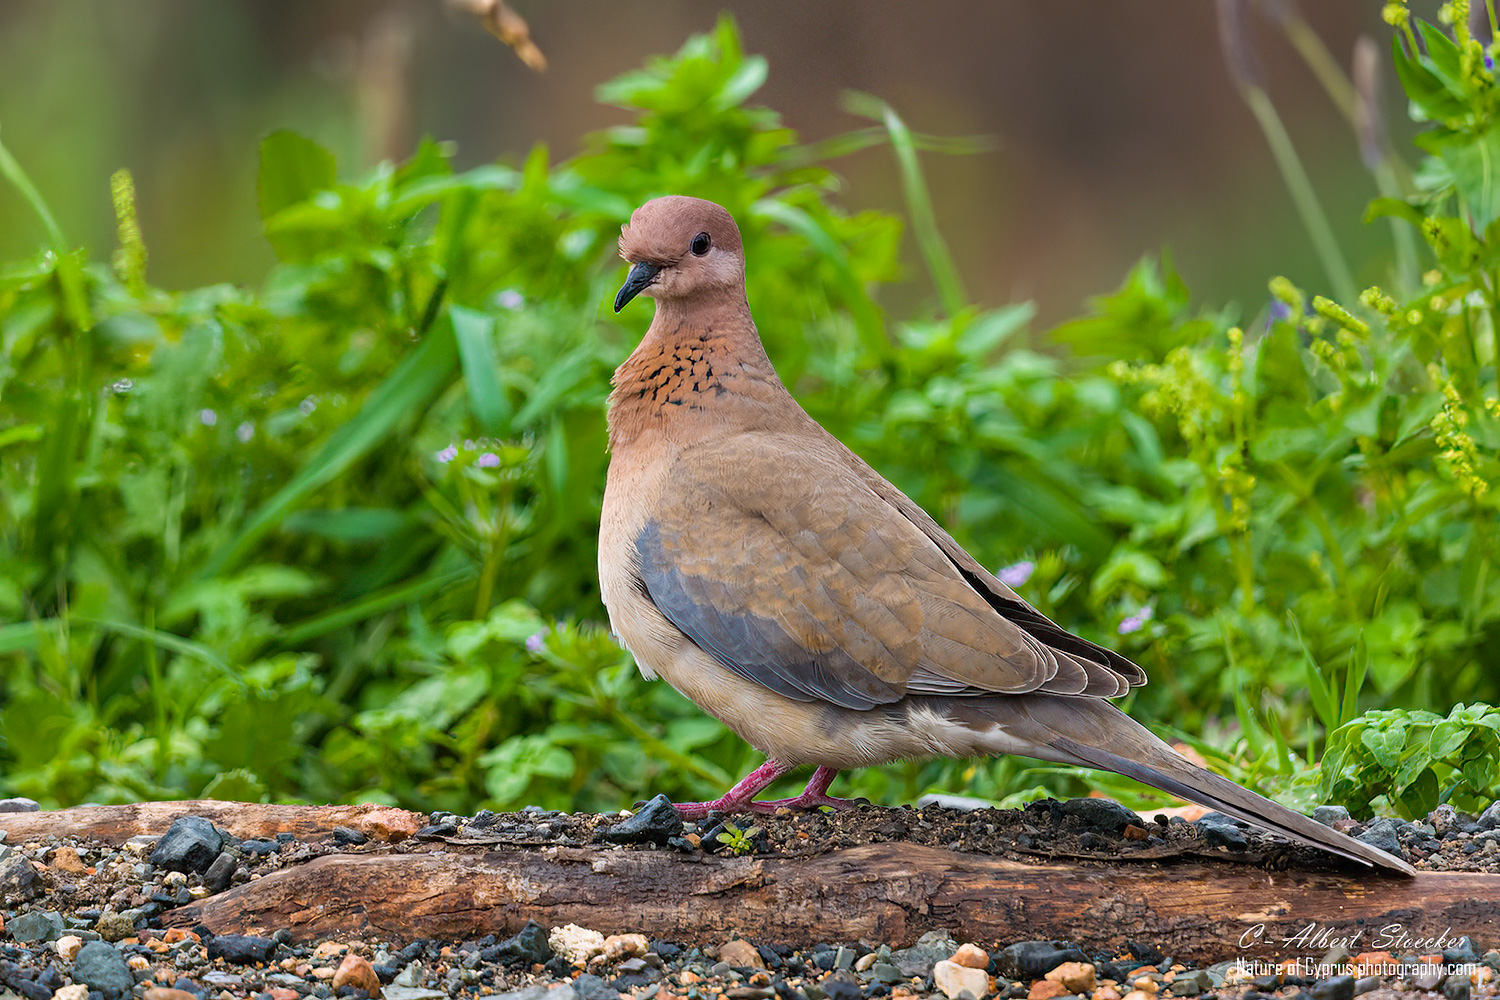 Palmtaube, Laughing Dove, Spilopelia senegalensis, Cyprus, Hide on Bird pound in our Garden, March 2022